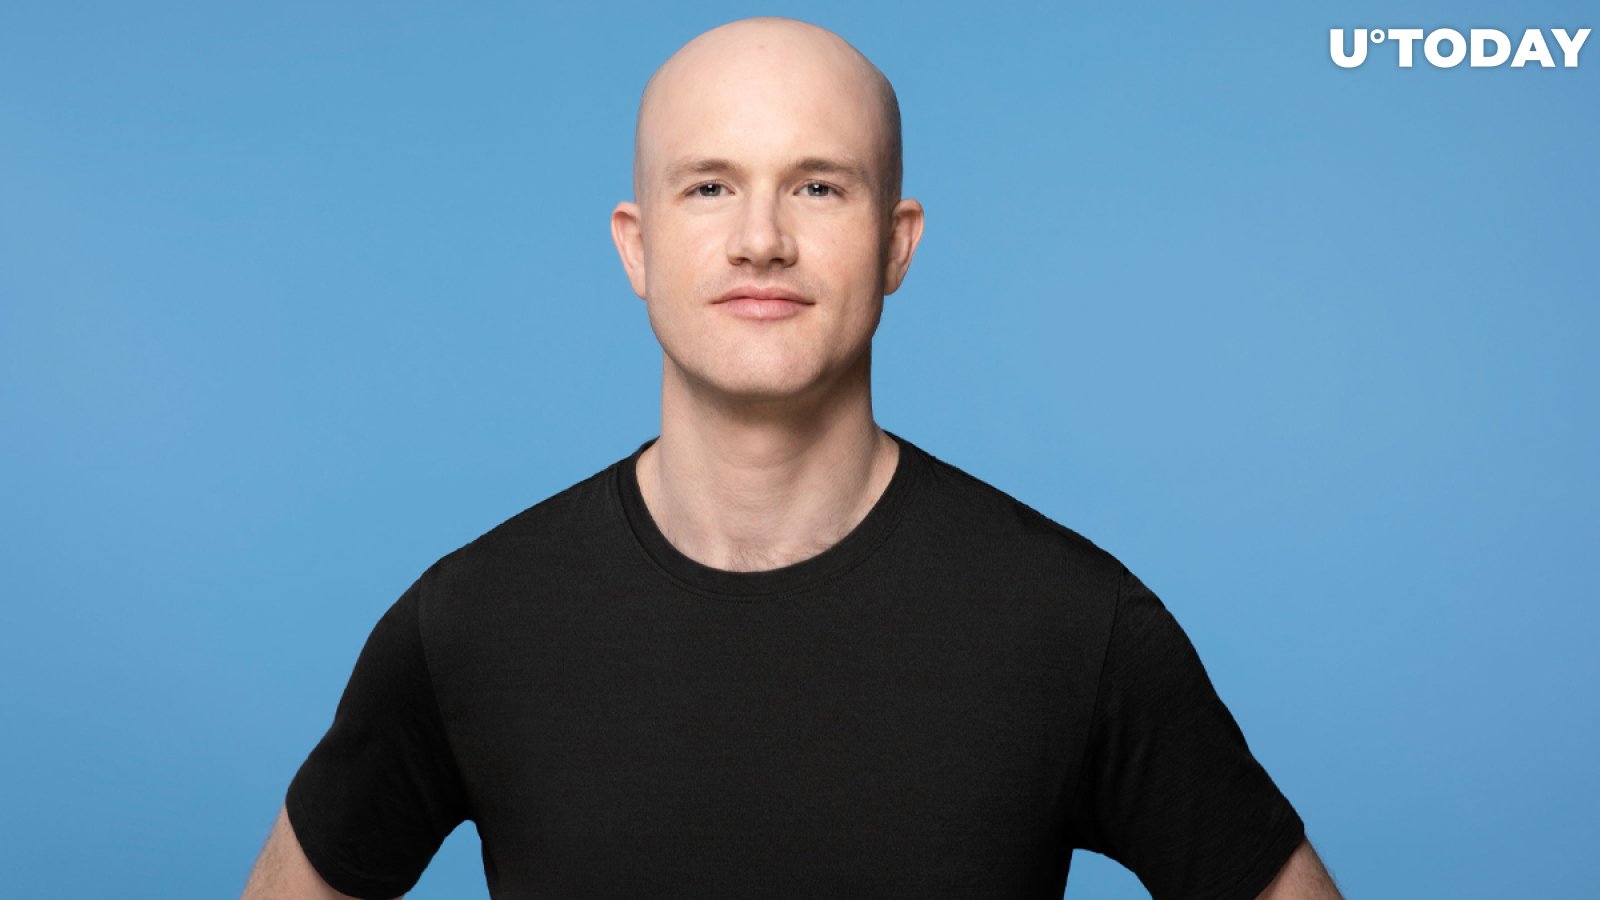 Coinbase CEO Brian Armstrong Breaks His Silence on Cooperating with U.S. Secret Service